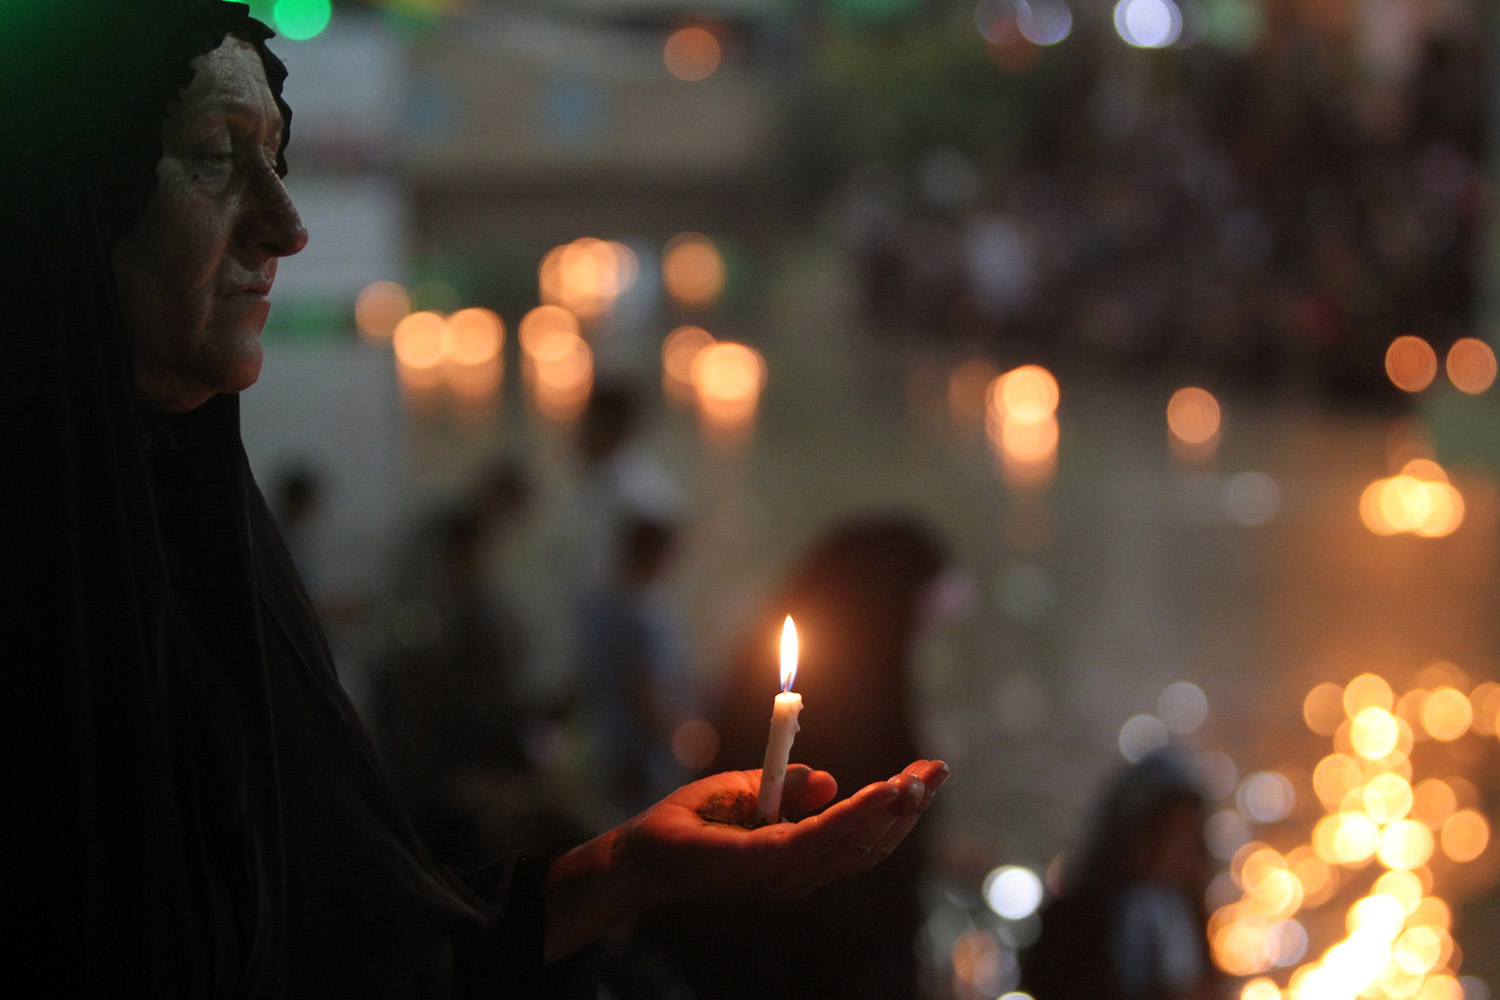 July 25, 2013. A Muslim Shiite woman carries a candle near the shrine of Imam Abbas, one of Shiite Islam's most revered figures, during the Shaabaniya ceremony commemorating the birth of Imam al-Mahdi, the 12th holiest figure for Shiite Muslims, in the central Iraqi city of Karbala.